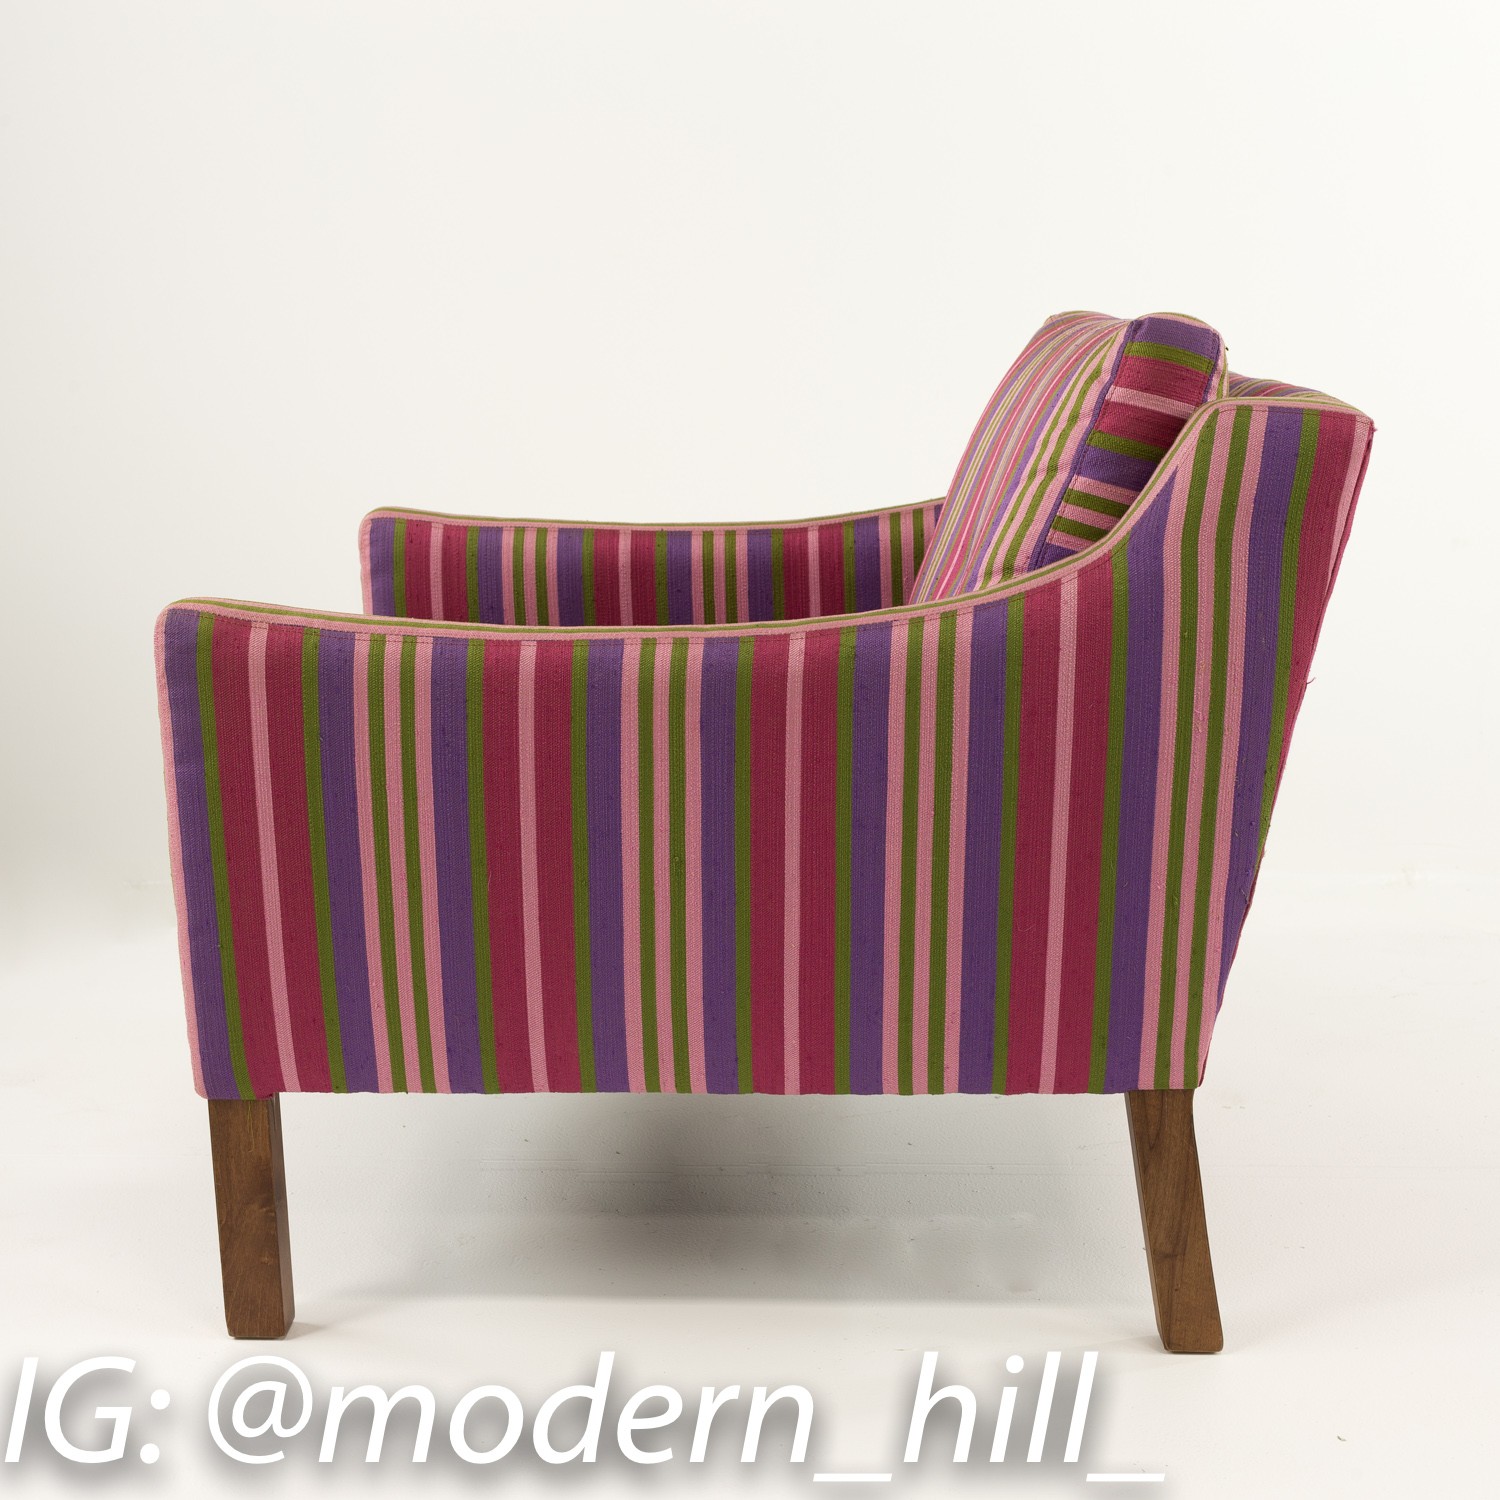 Borge Mogensen Model 2207 for Federicia Style Mid-century Modern Lounge Chairs